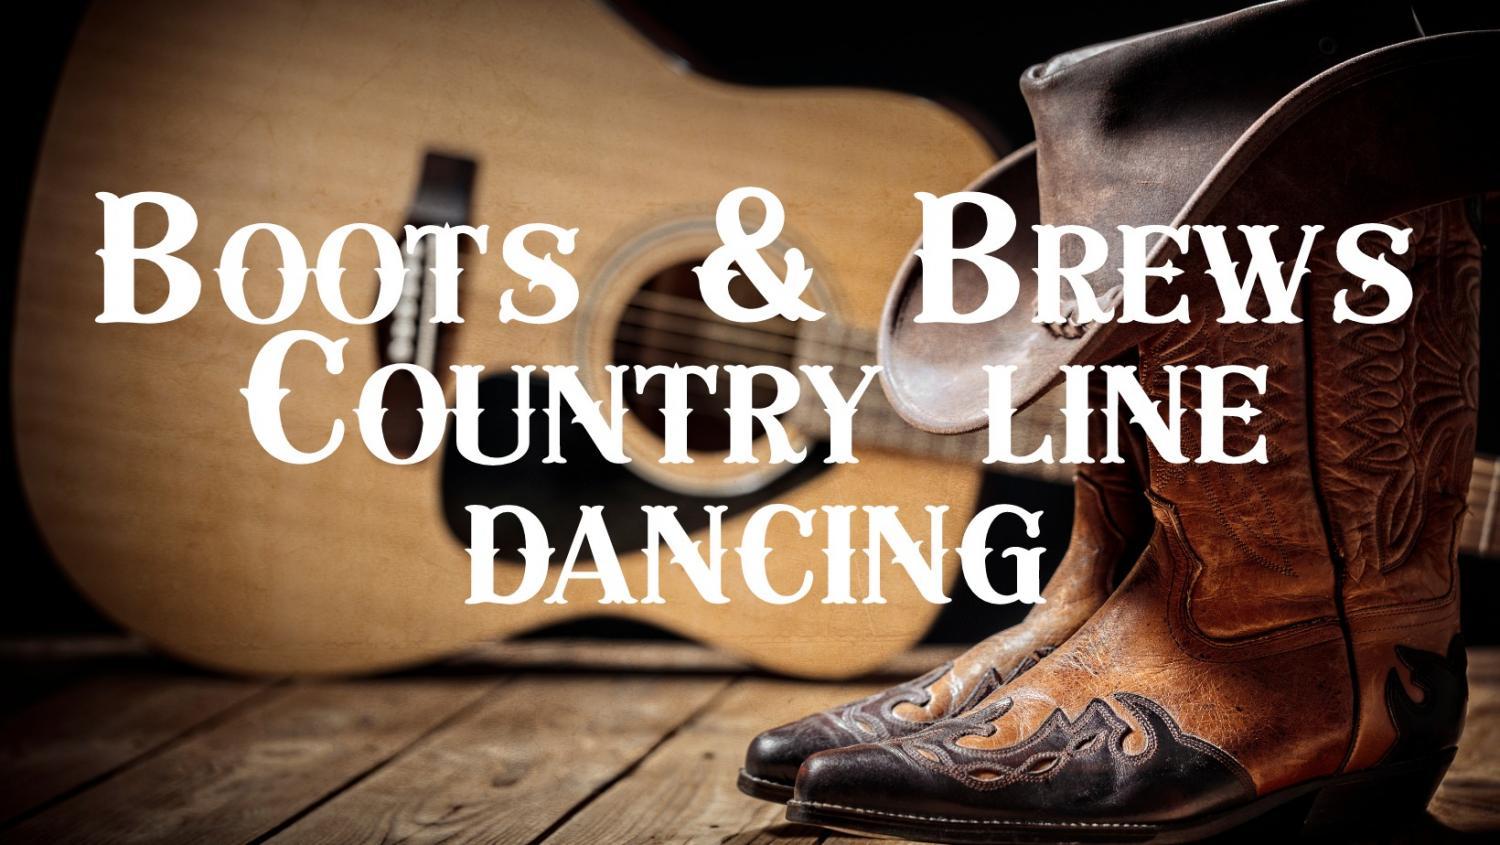 Boots & Brews Country Line Dancing